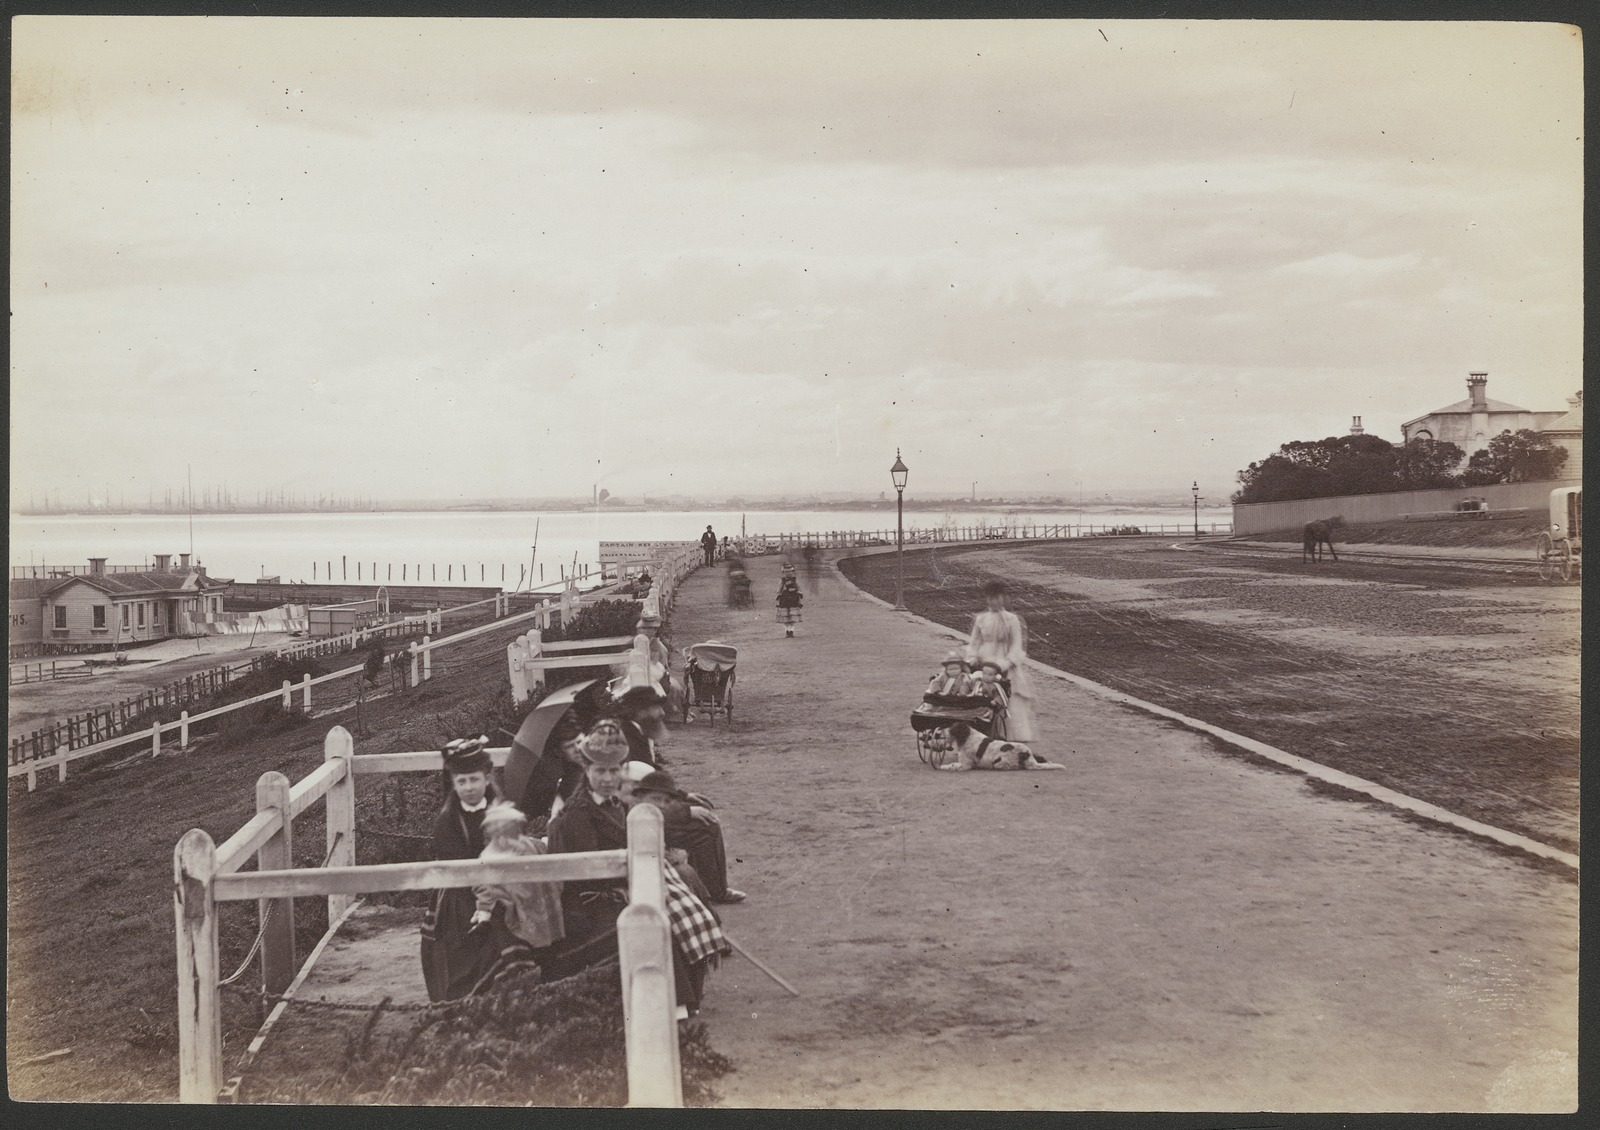 Black and white photo of the St Kilda esplanade with a sign advertising Captain Kenney's baths in the background